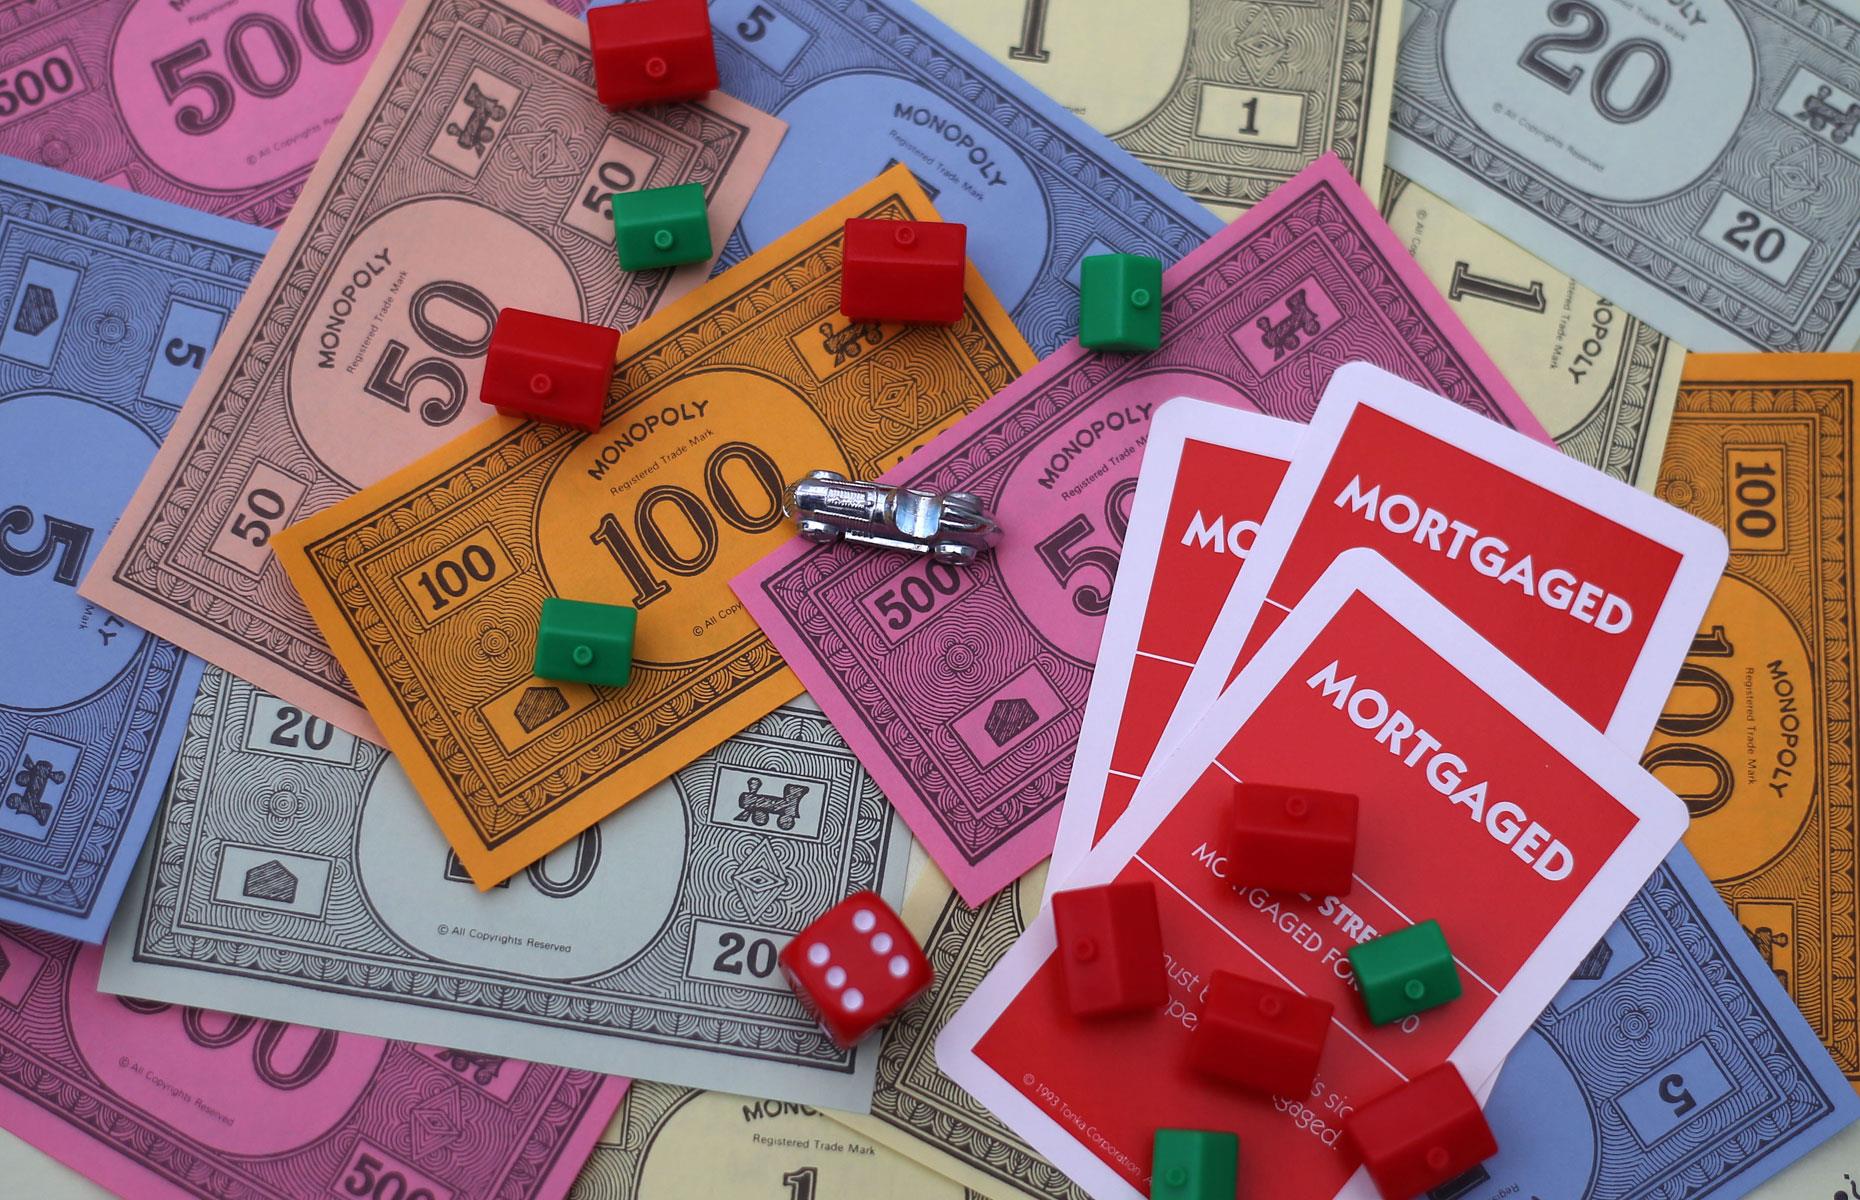 More Monopoly money is printed in the US than real cash